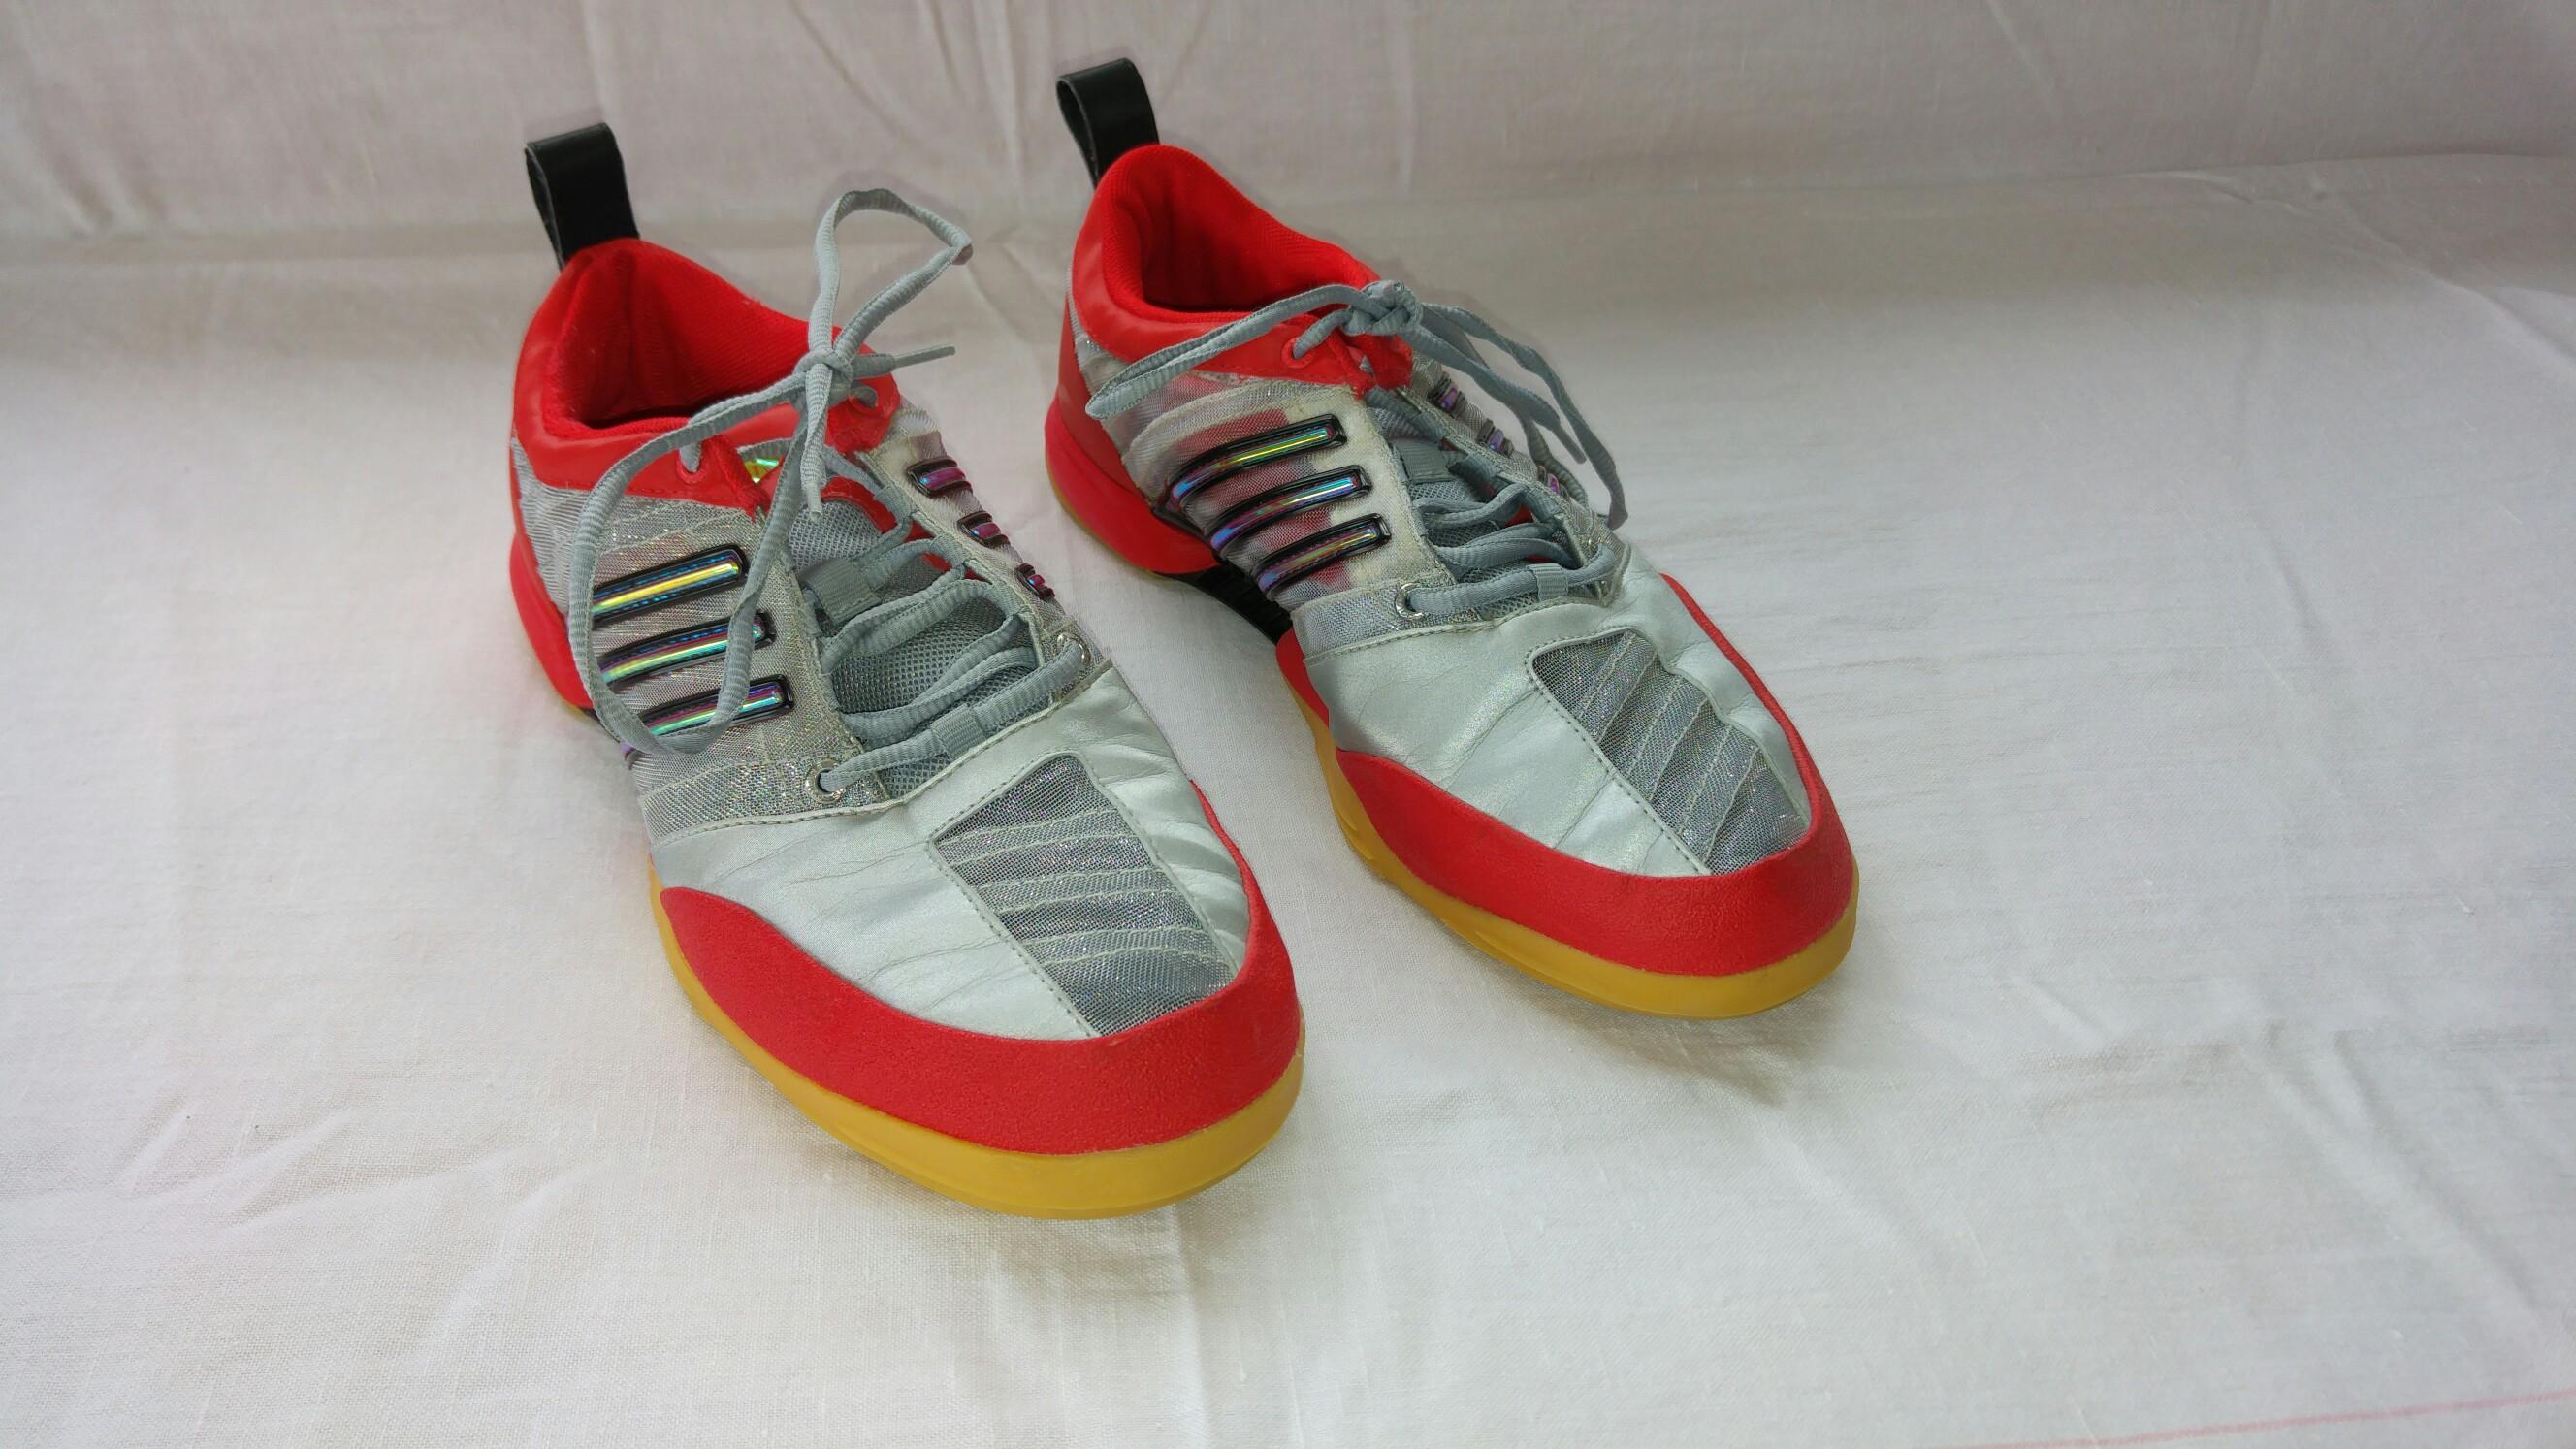 Adidas Schuhe 42 2/3 Clima cool 4T in 91361 Pinzberg for €60.00 for sale |  Shpock